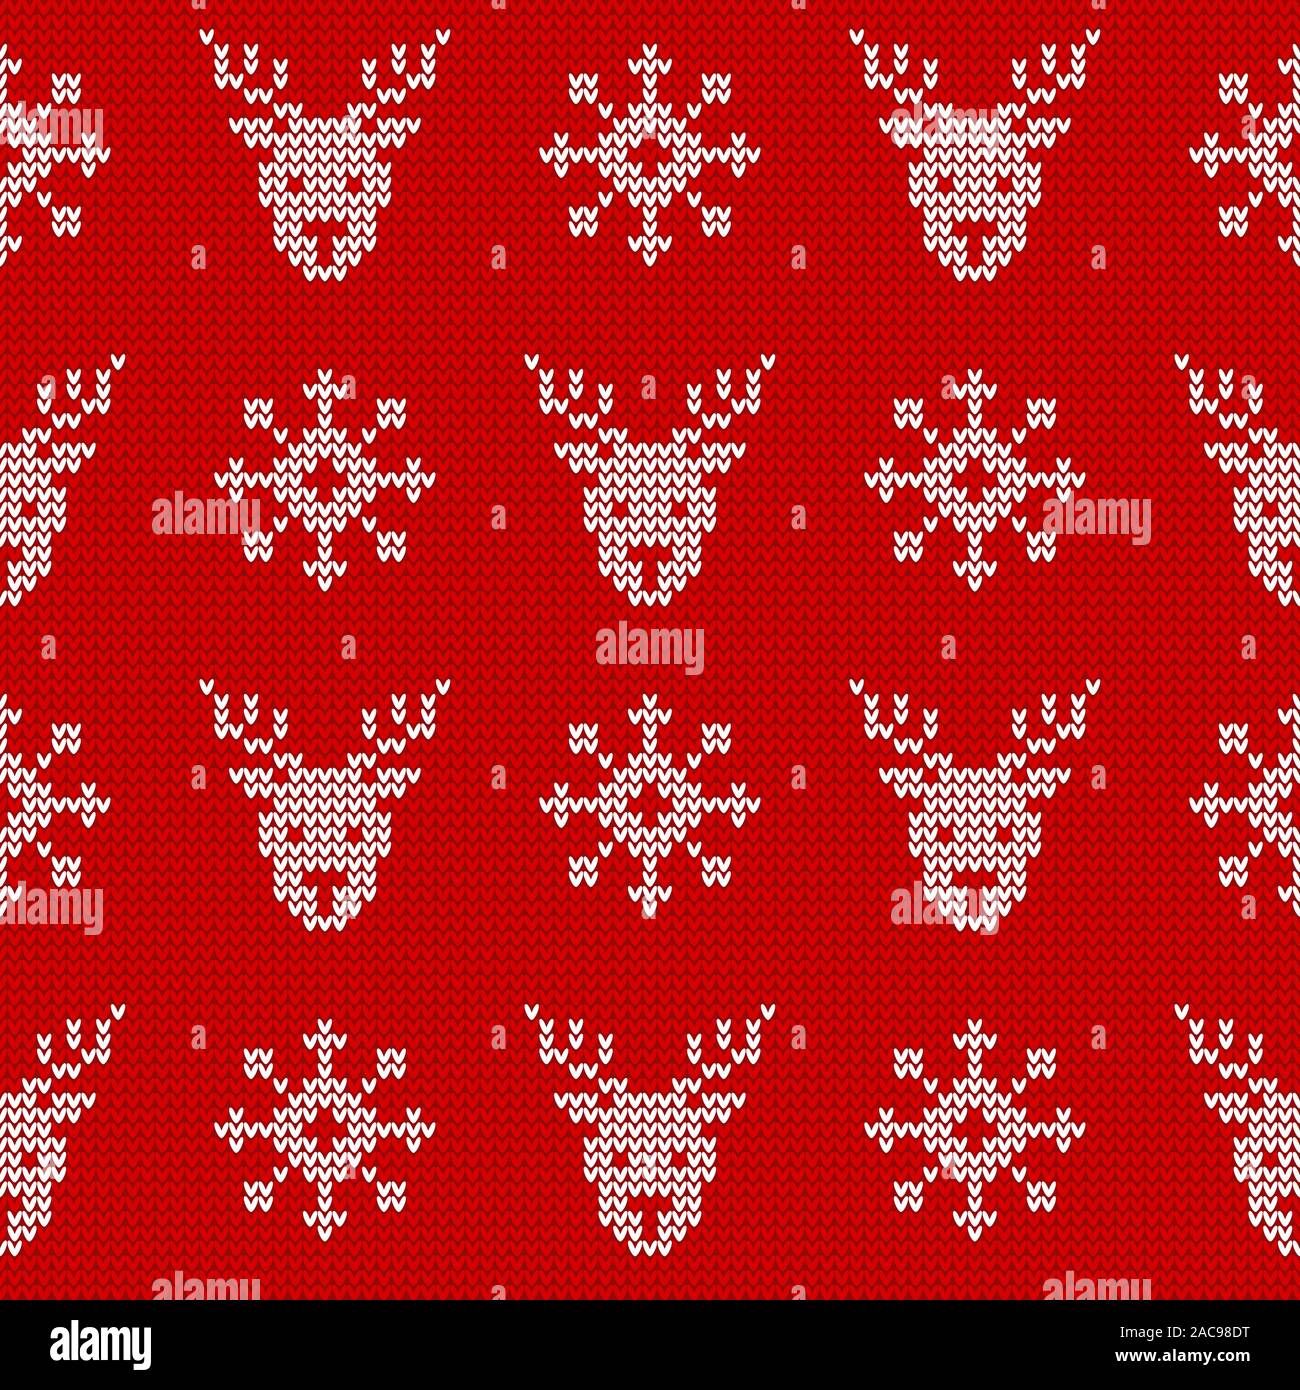 Knitted seamless pattern with deers and snowflakes. Vector background. Red and white sweater ornament for Christmas or winter design. Stock Vector